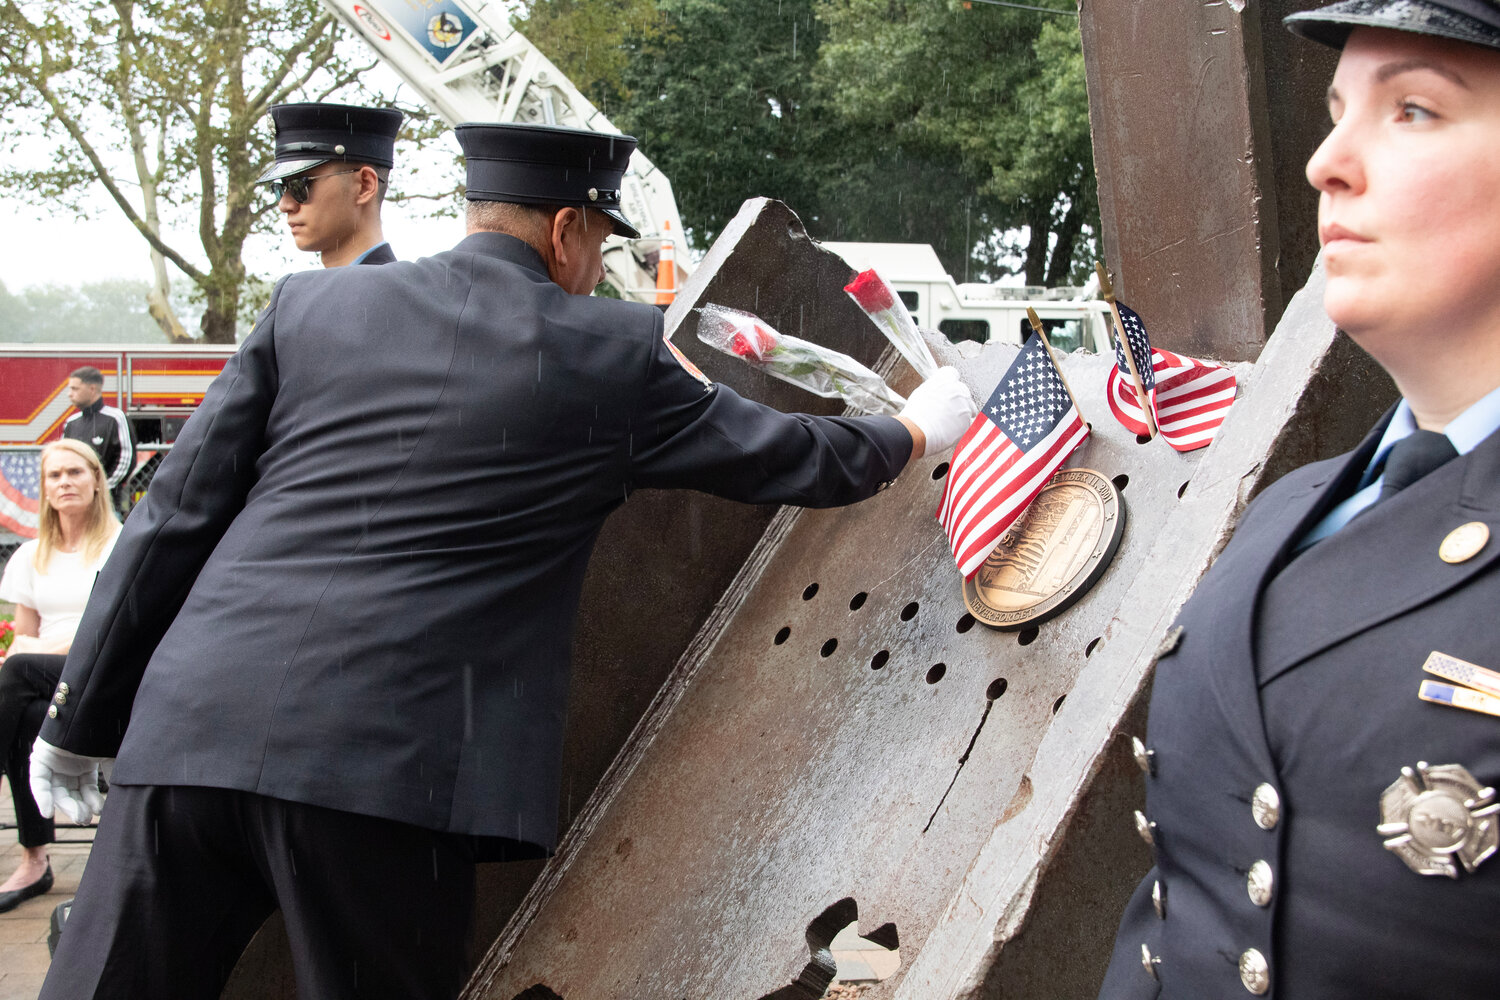 For each of the 25 names read for community members who died in the attacks, a rose was placed on the World Trade Center steel at the Franklin Square 9/11 Memorial.